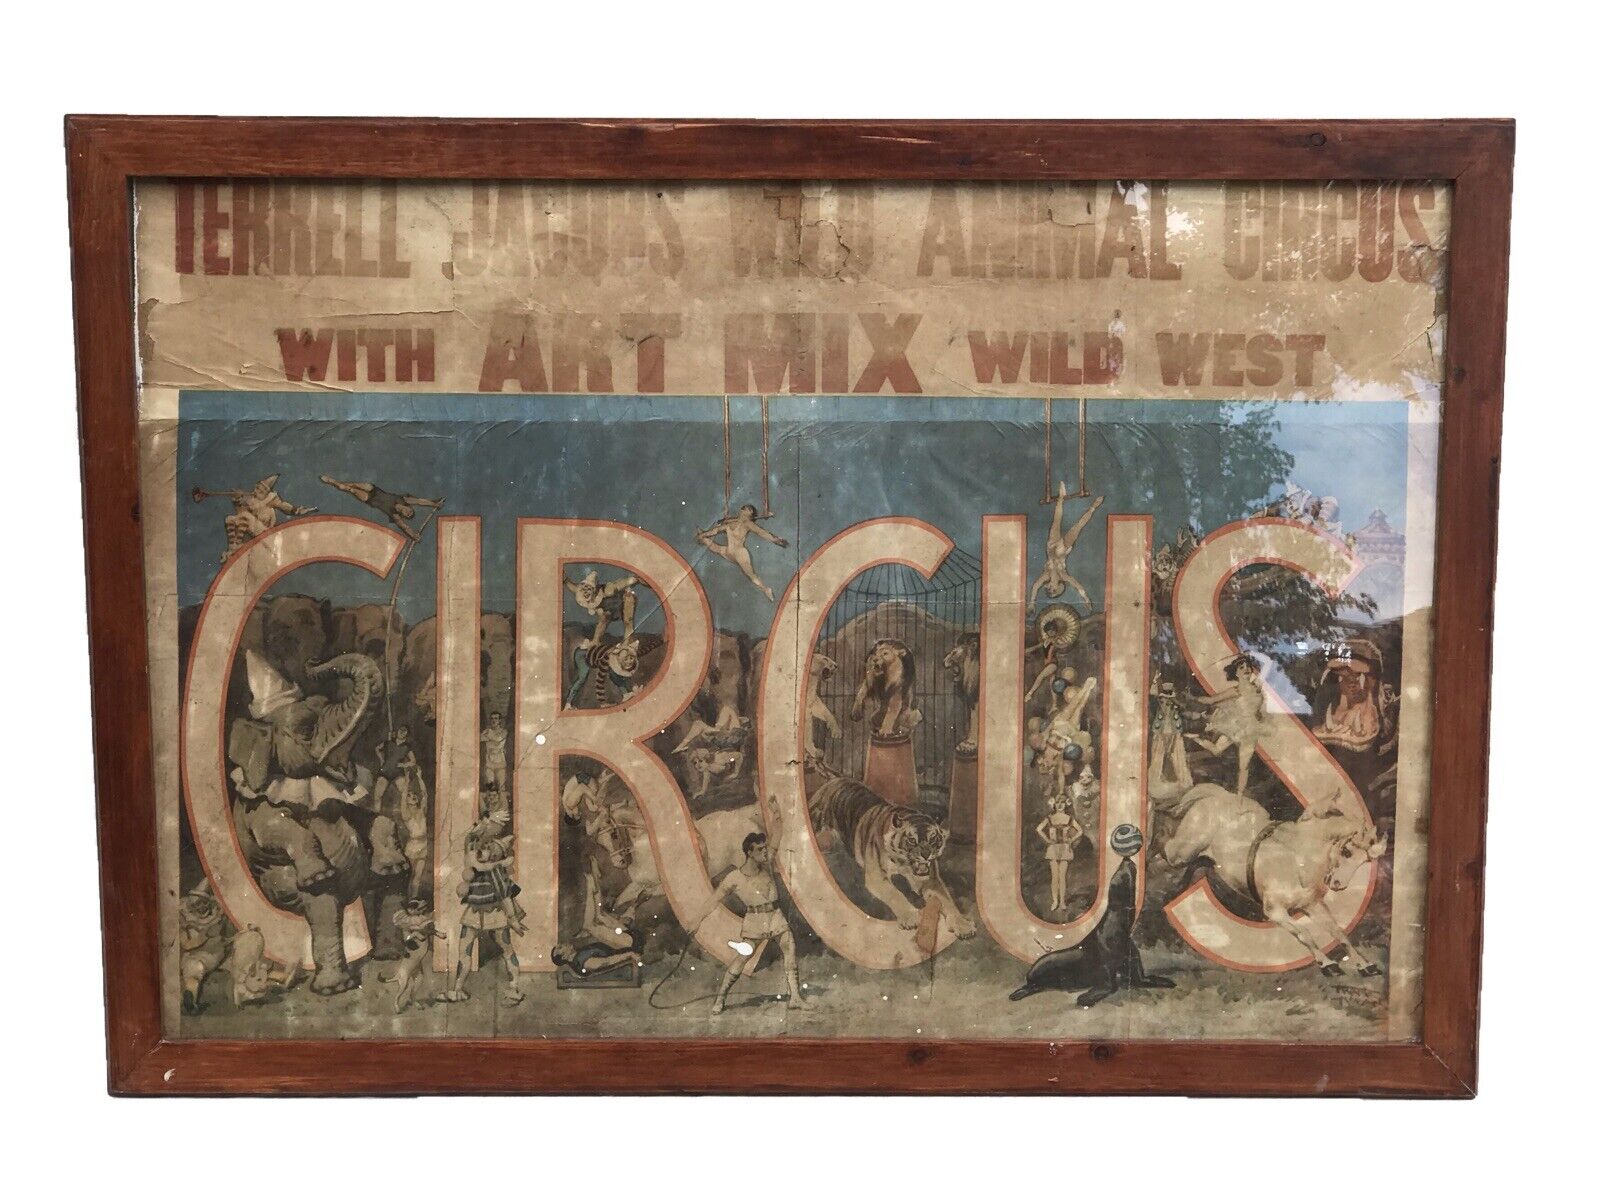 TERRELL JACOBS WILD ANIMAL CIRCUS ANTIQUE COLORED ADVERTISING POSTER